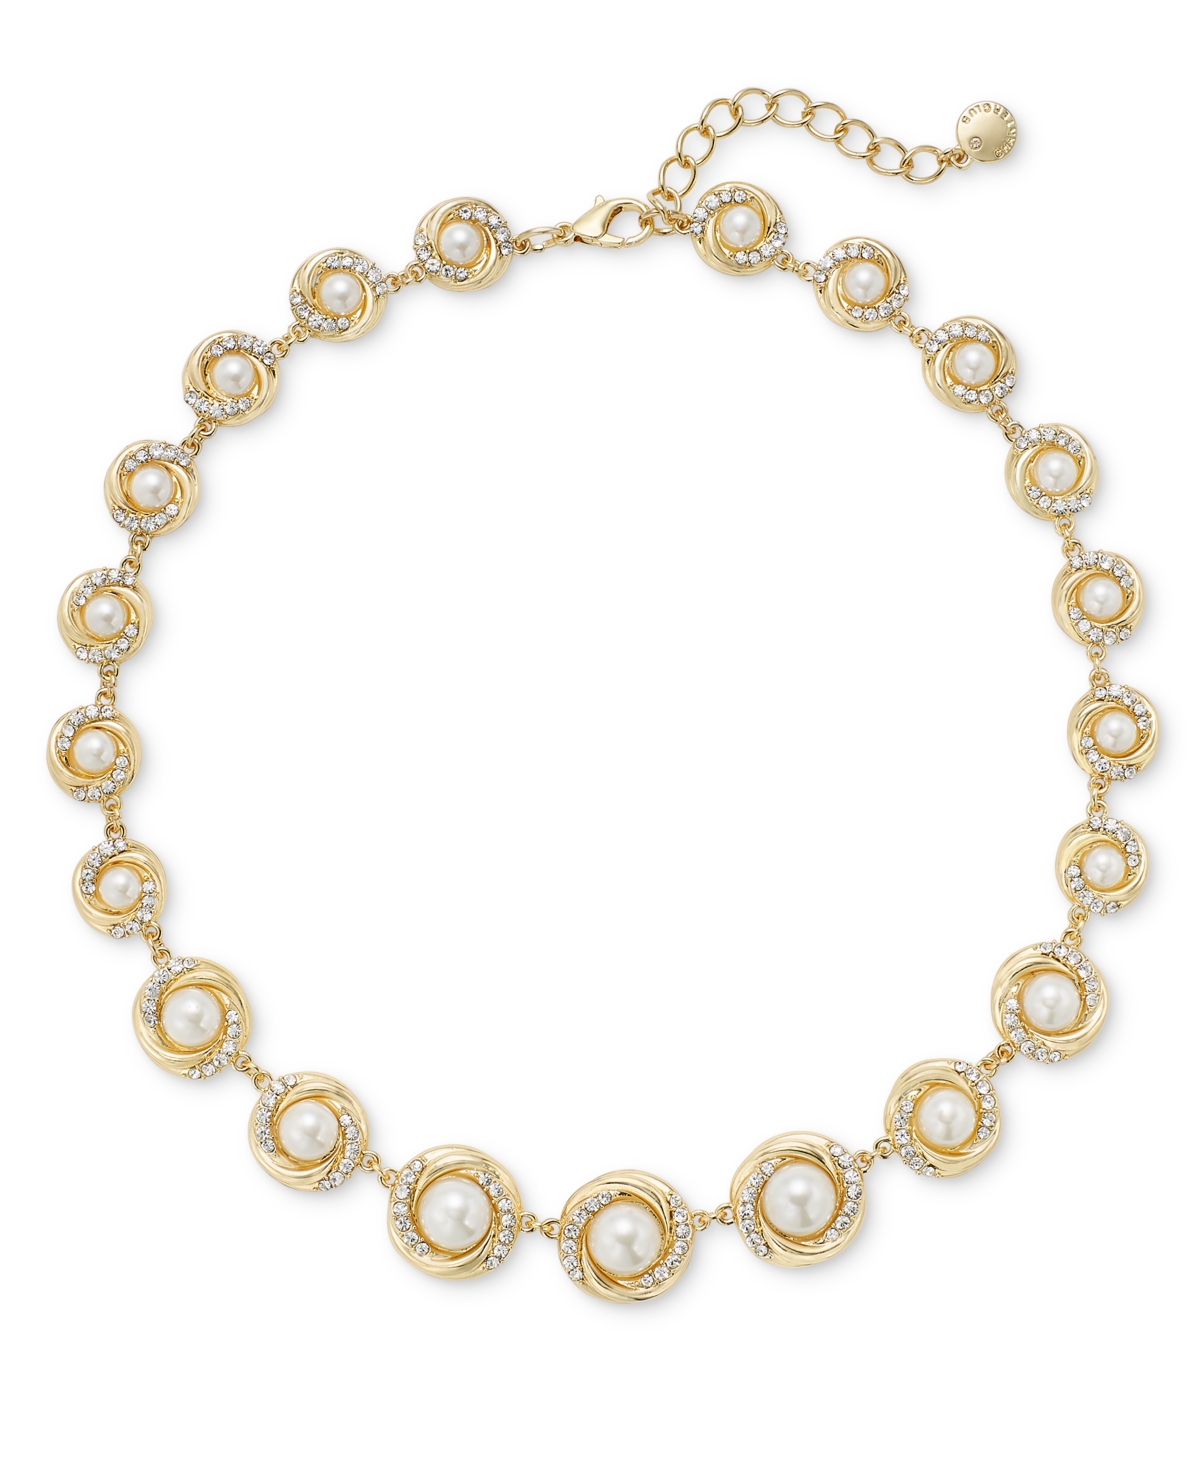 Gold-Tone Pave & Imitation Pearl All-Around Collar Necklace, 17"+ 2" extender, Created for Macy's - Gold